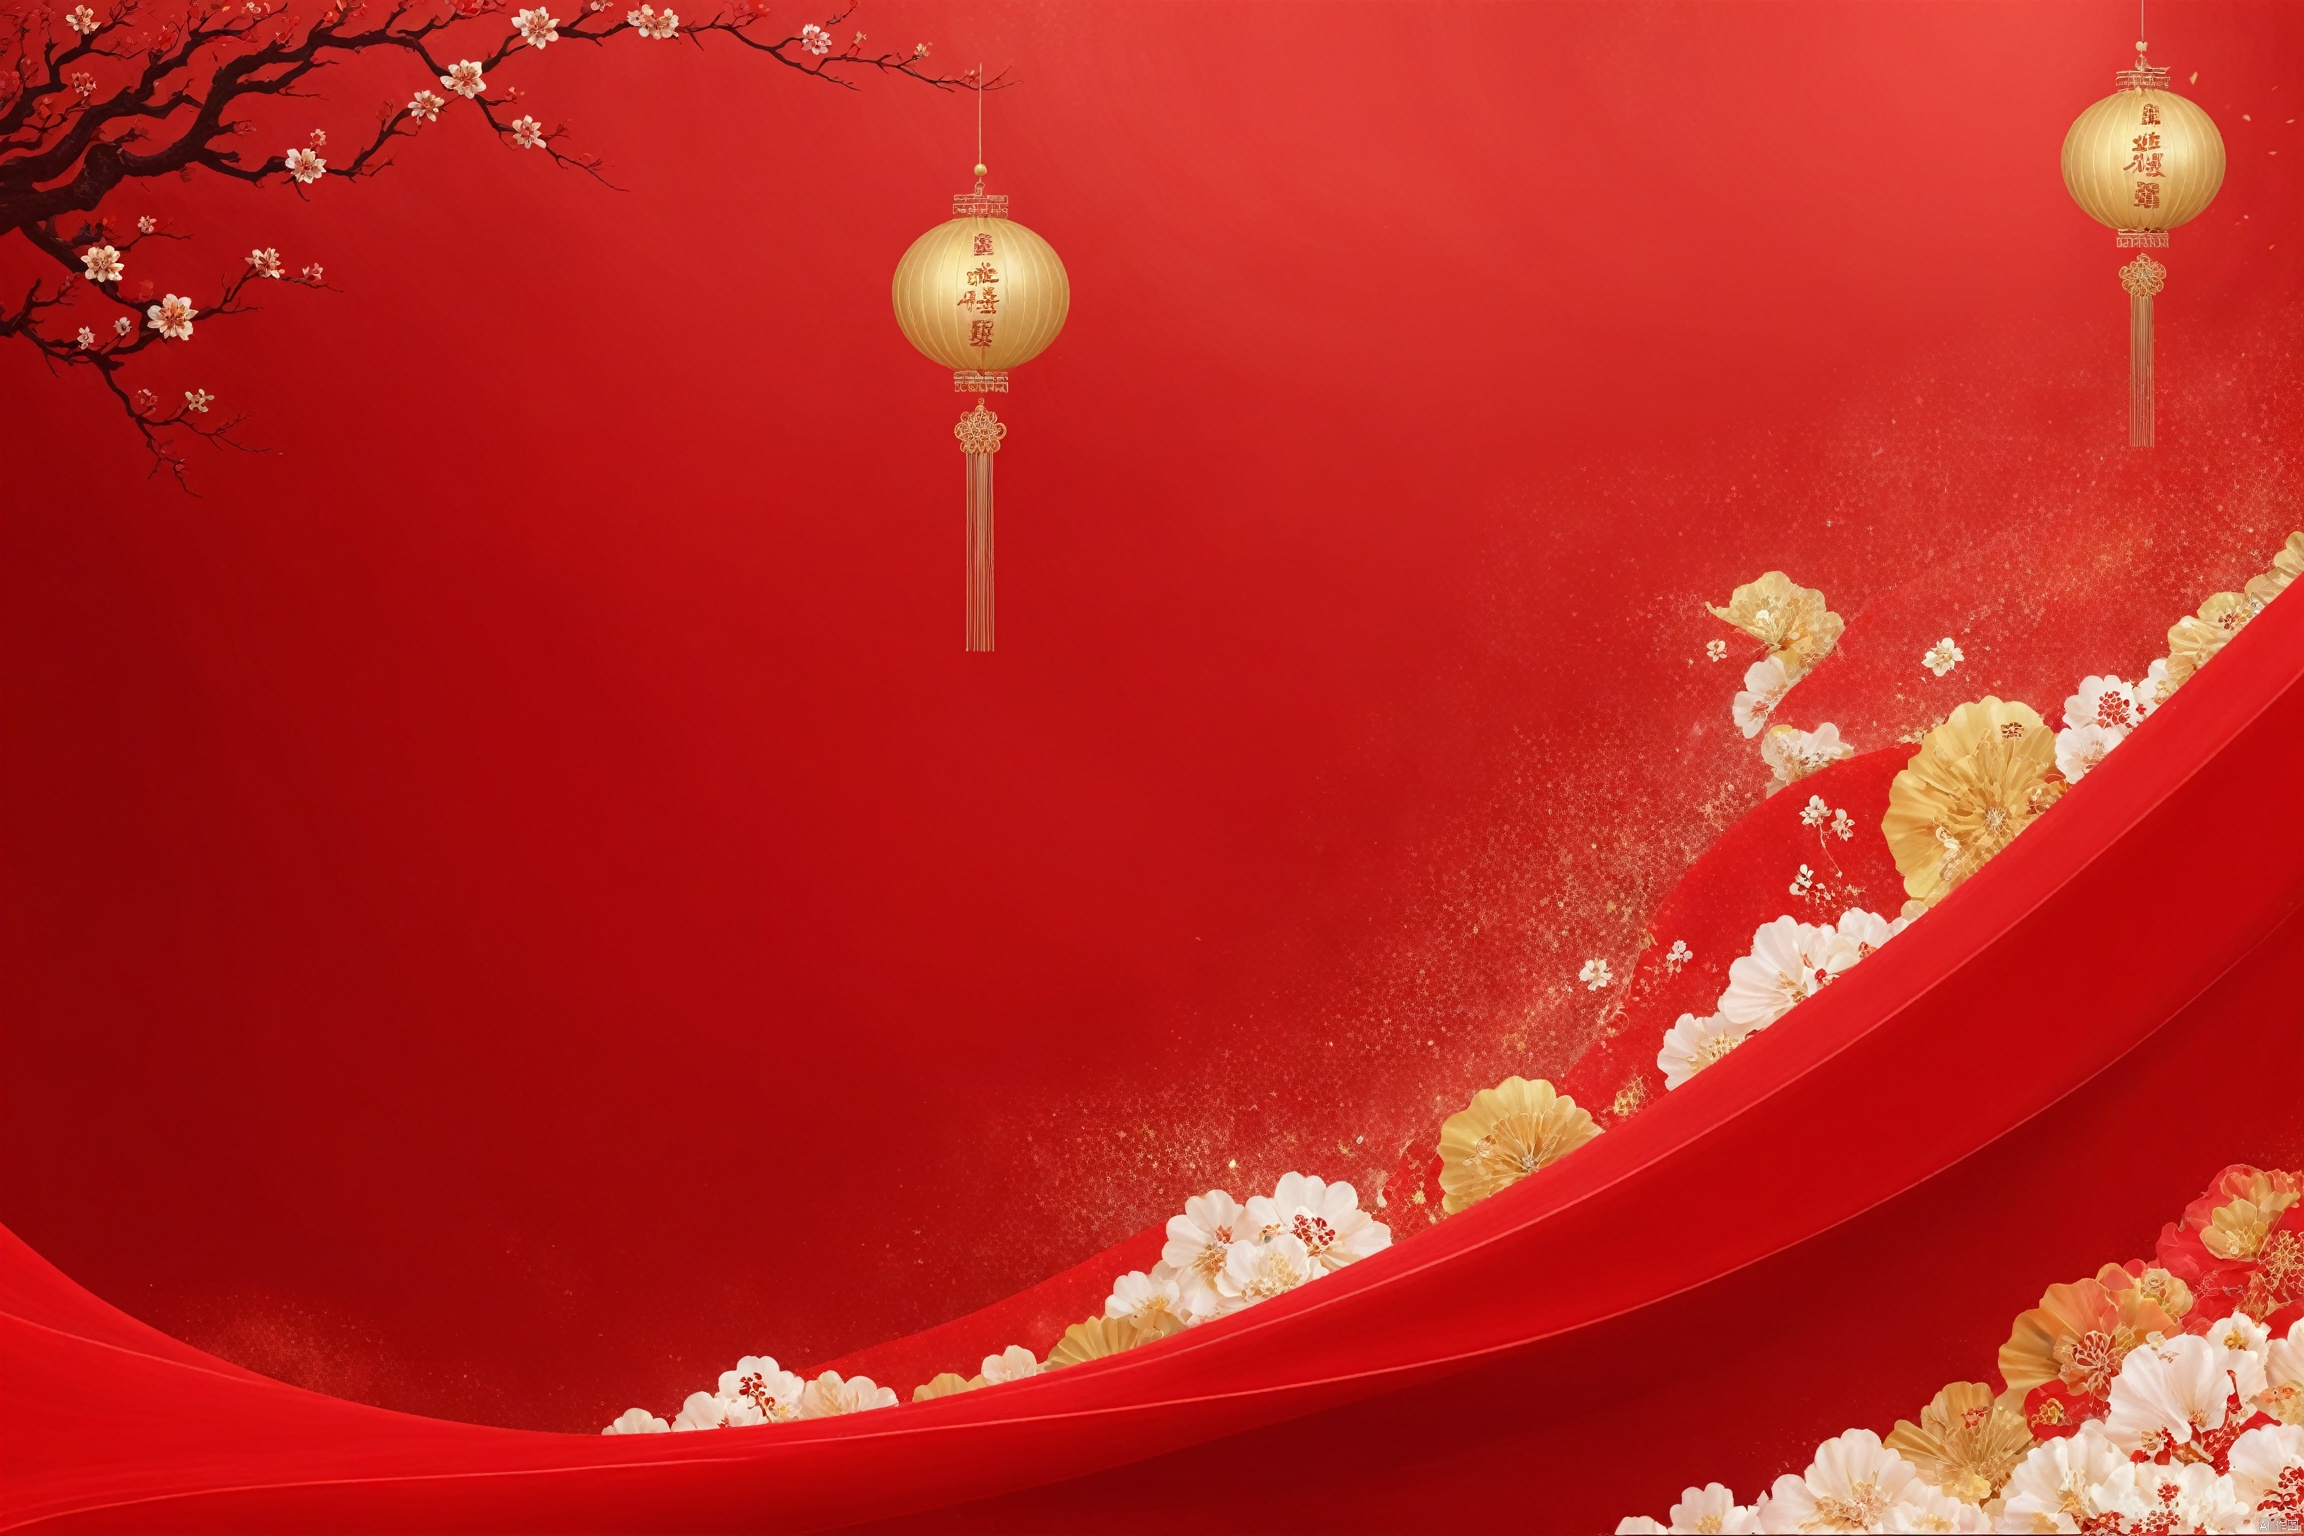  (Fantasy Style: 1.5) ,(Exquisite Details),solo,mature,incredibly absurdres,absurdres,realistic,full_shot, , Red festive wallpaper,Golden text content: "龙年大吉"